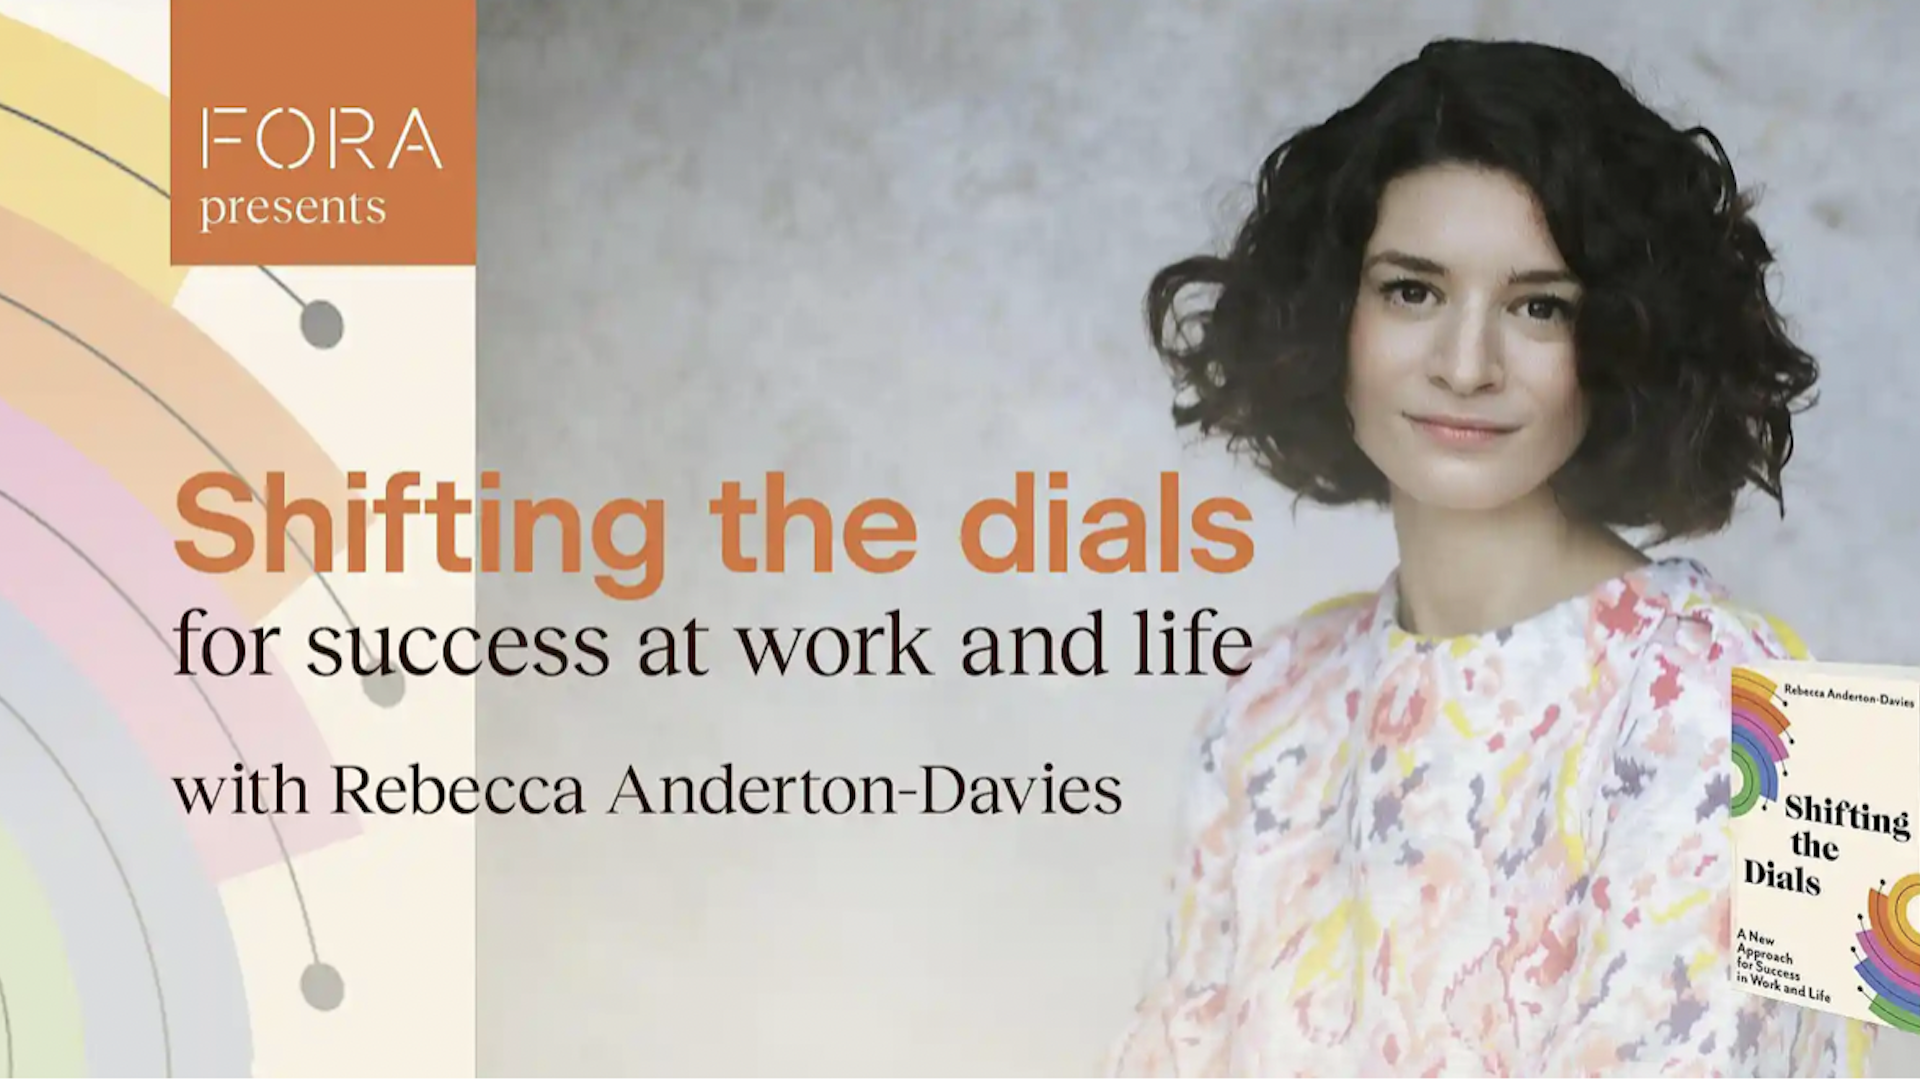 Shifting the Dials for success at work & life with Rebecca Anderton-Davies @Fora Spitalfields